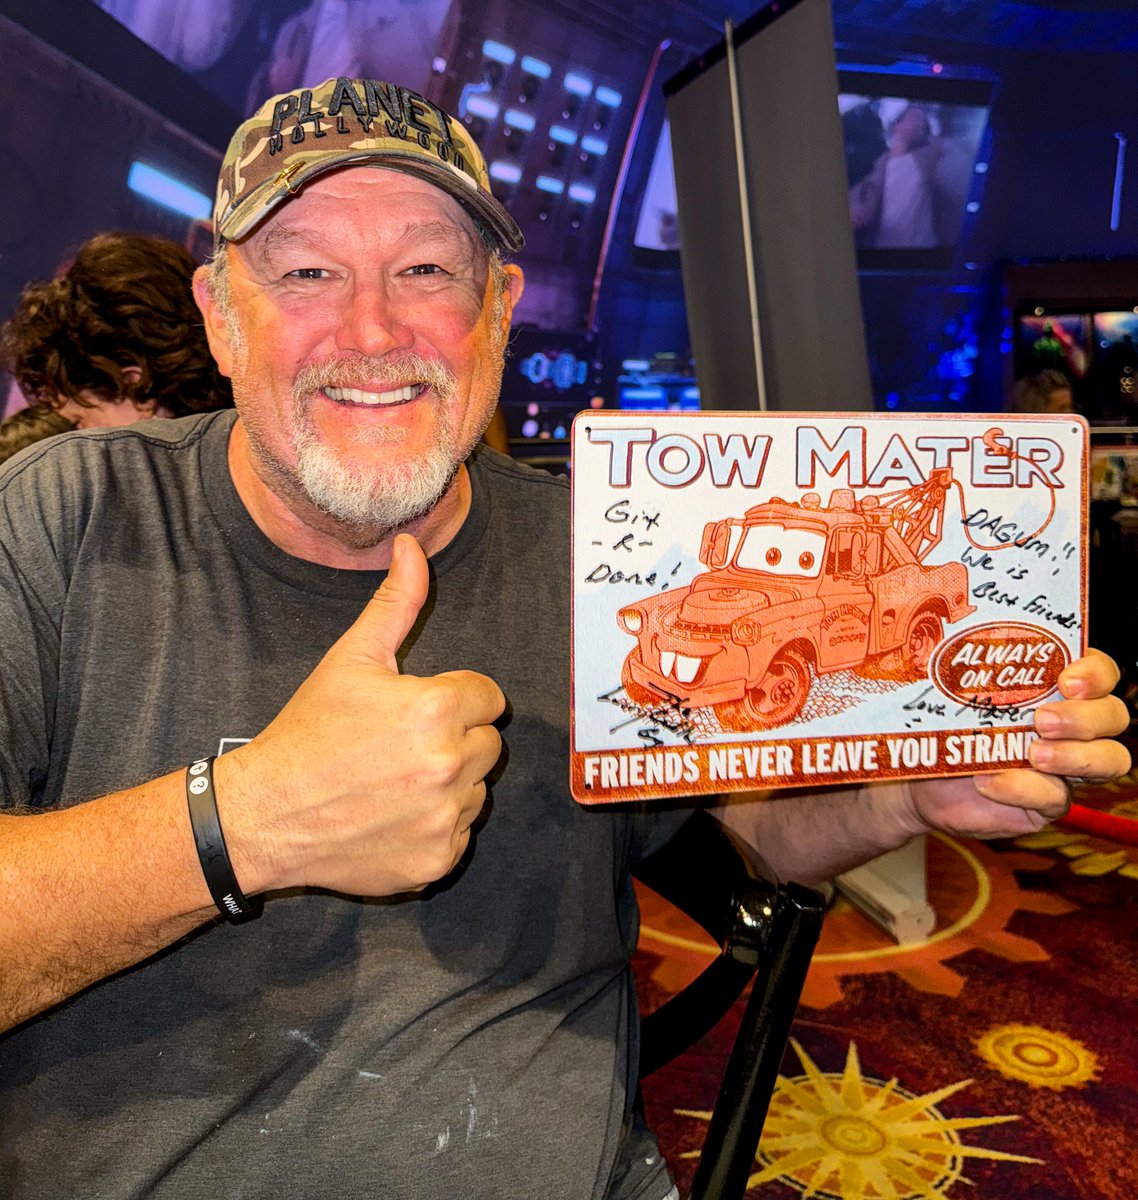 Thank you to @GitRDoneLarry for dining with us at Planet Hollywood ⭐️ Be sure to check out his signed memorabilia the next time you visit!